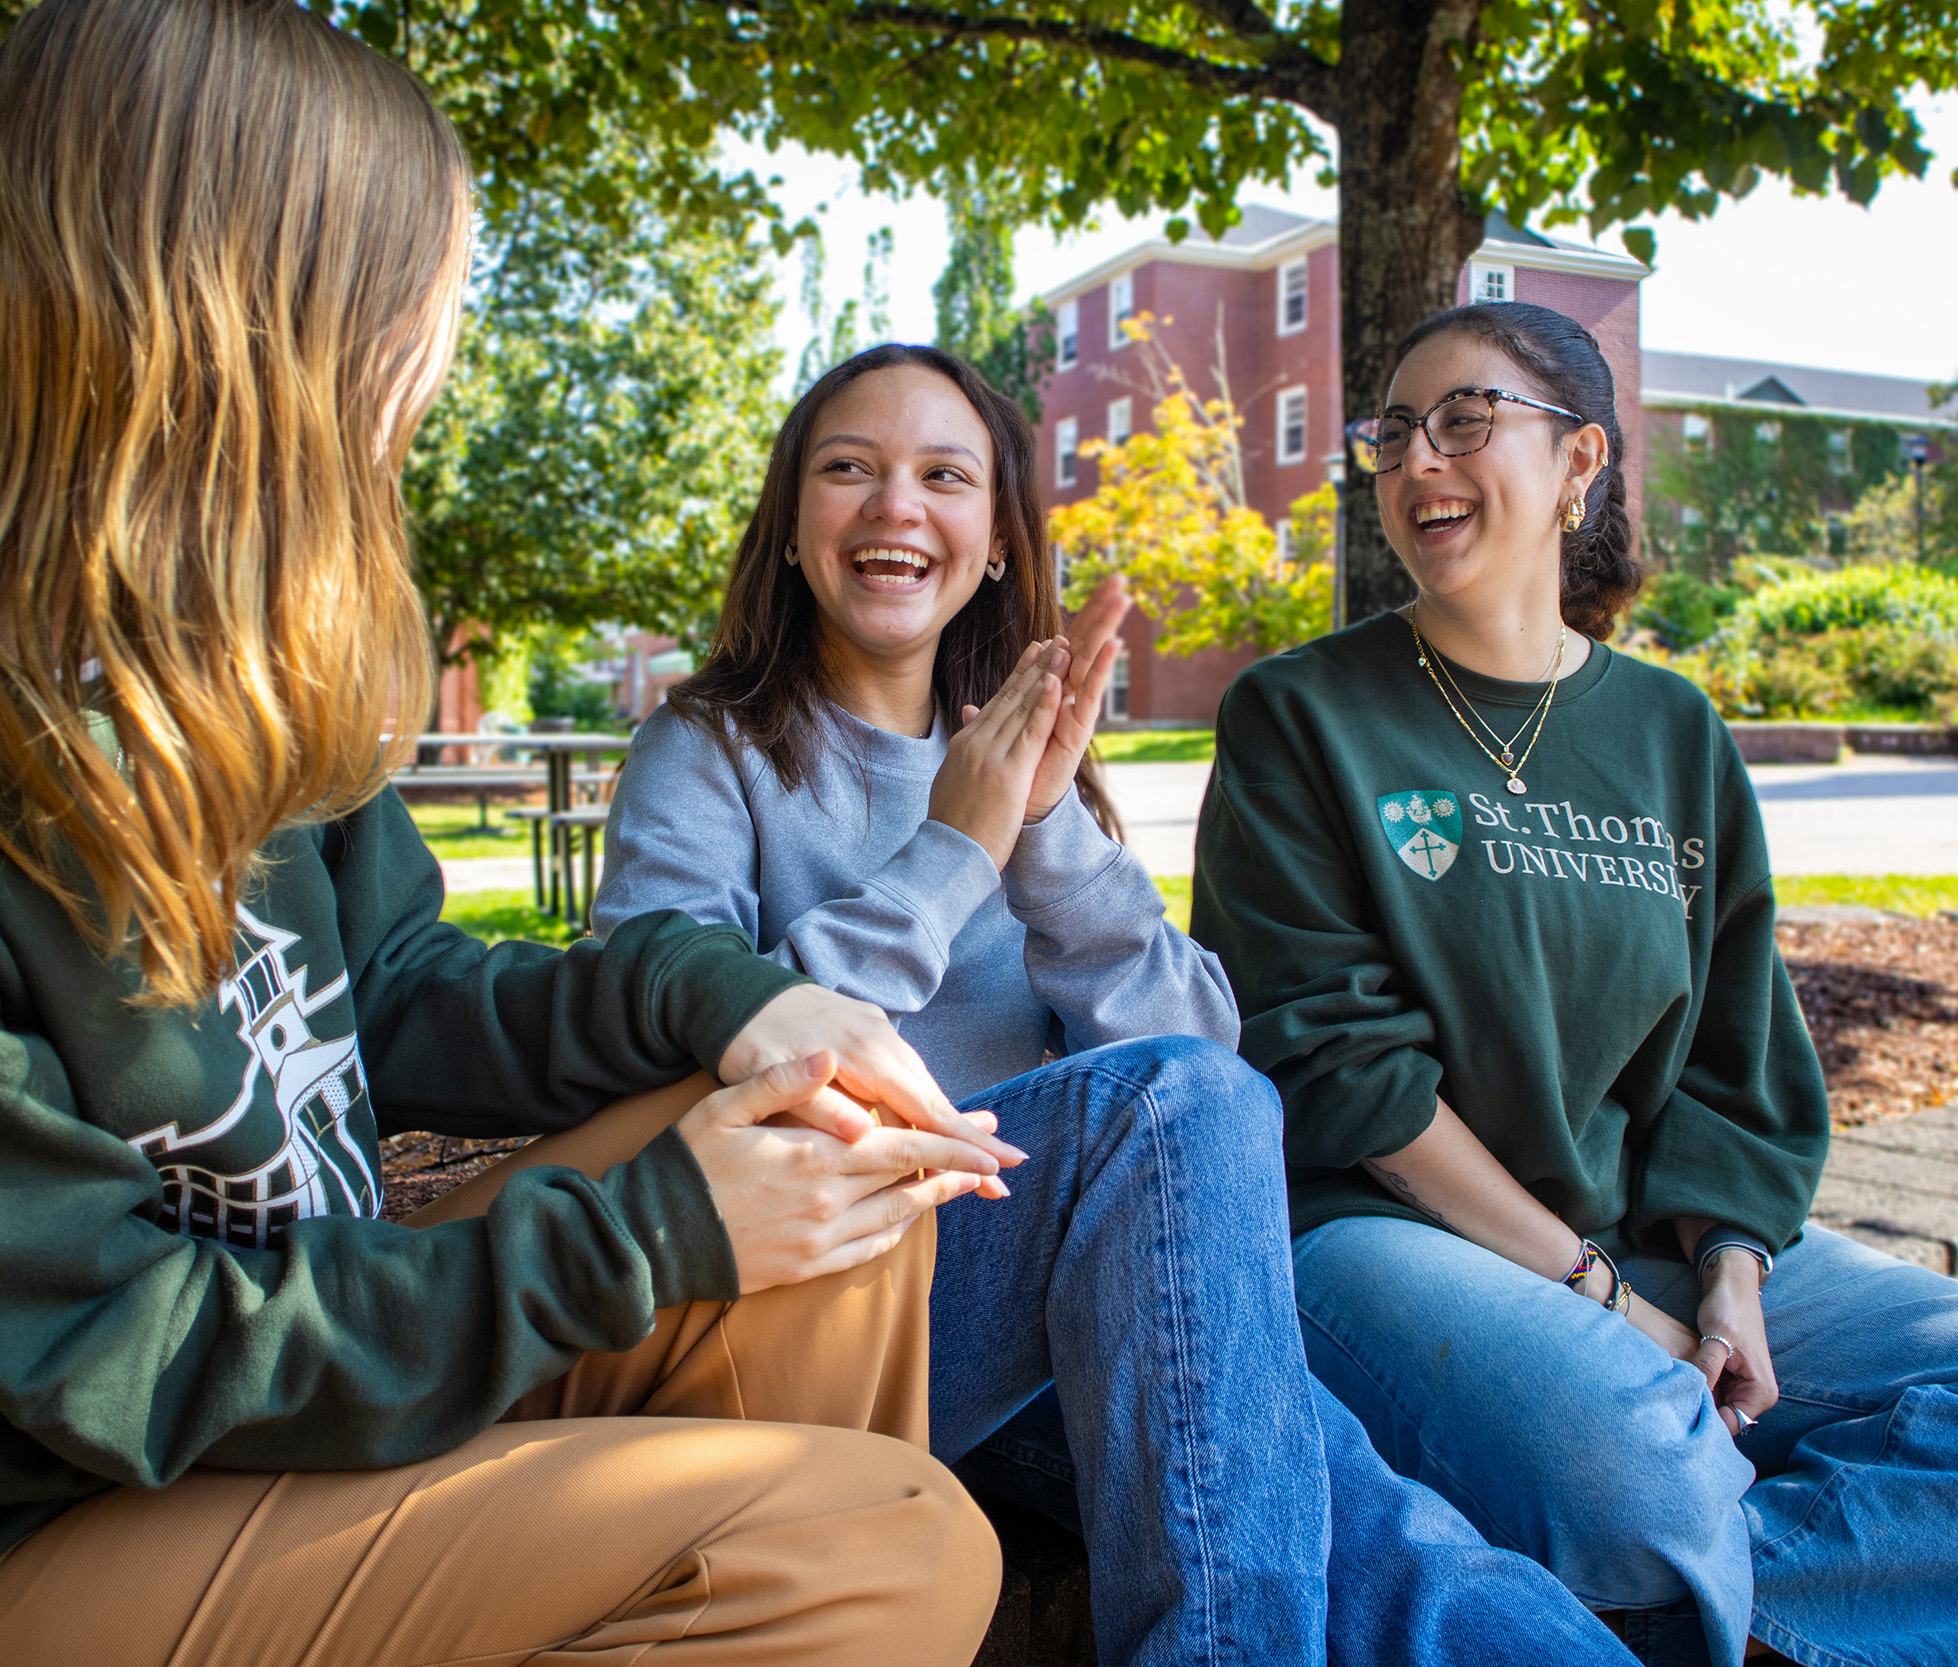 A photo of three female students sitting, one laughing